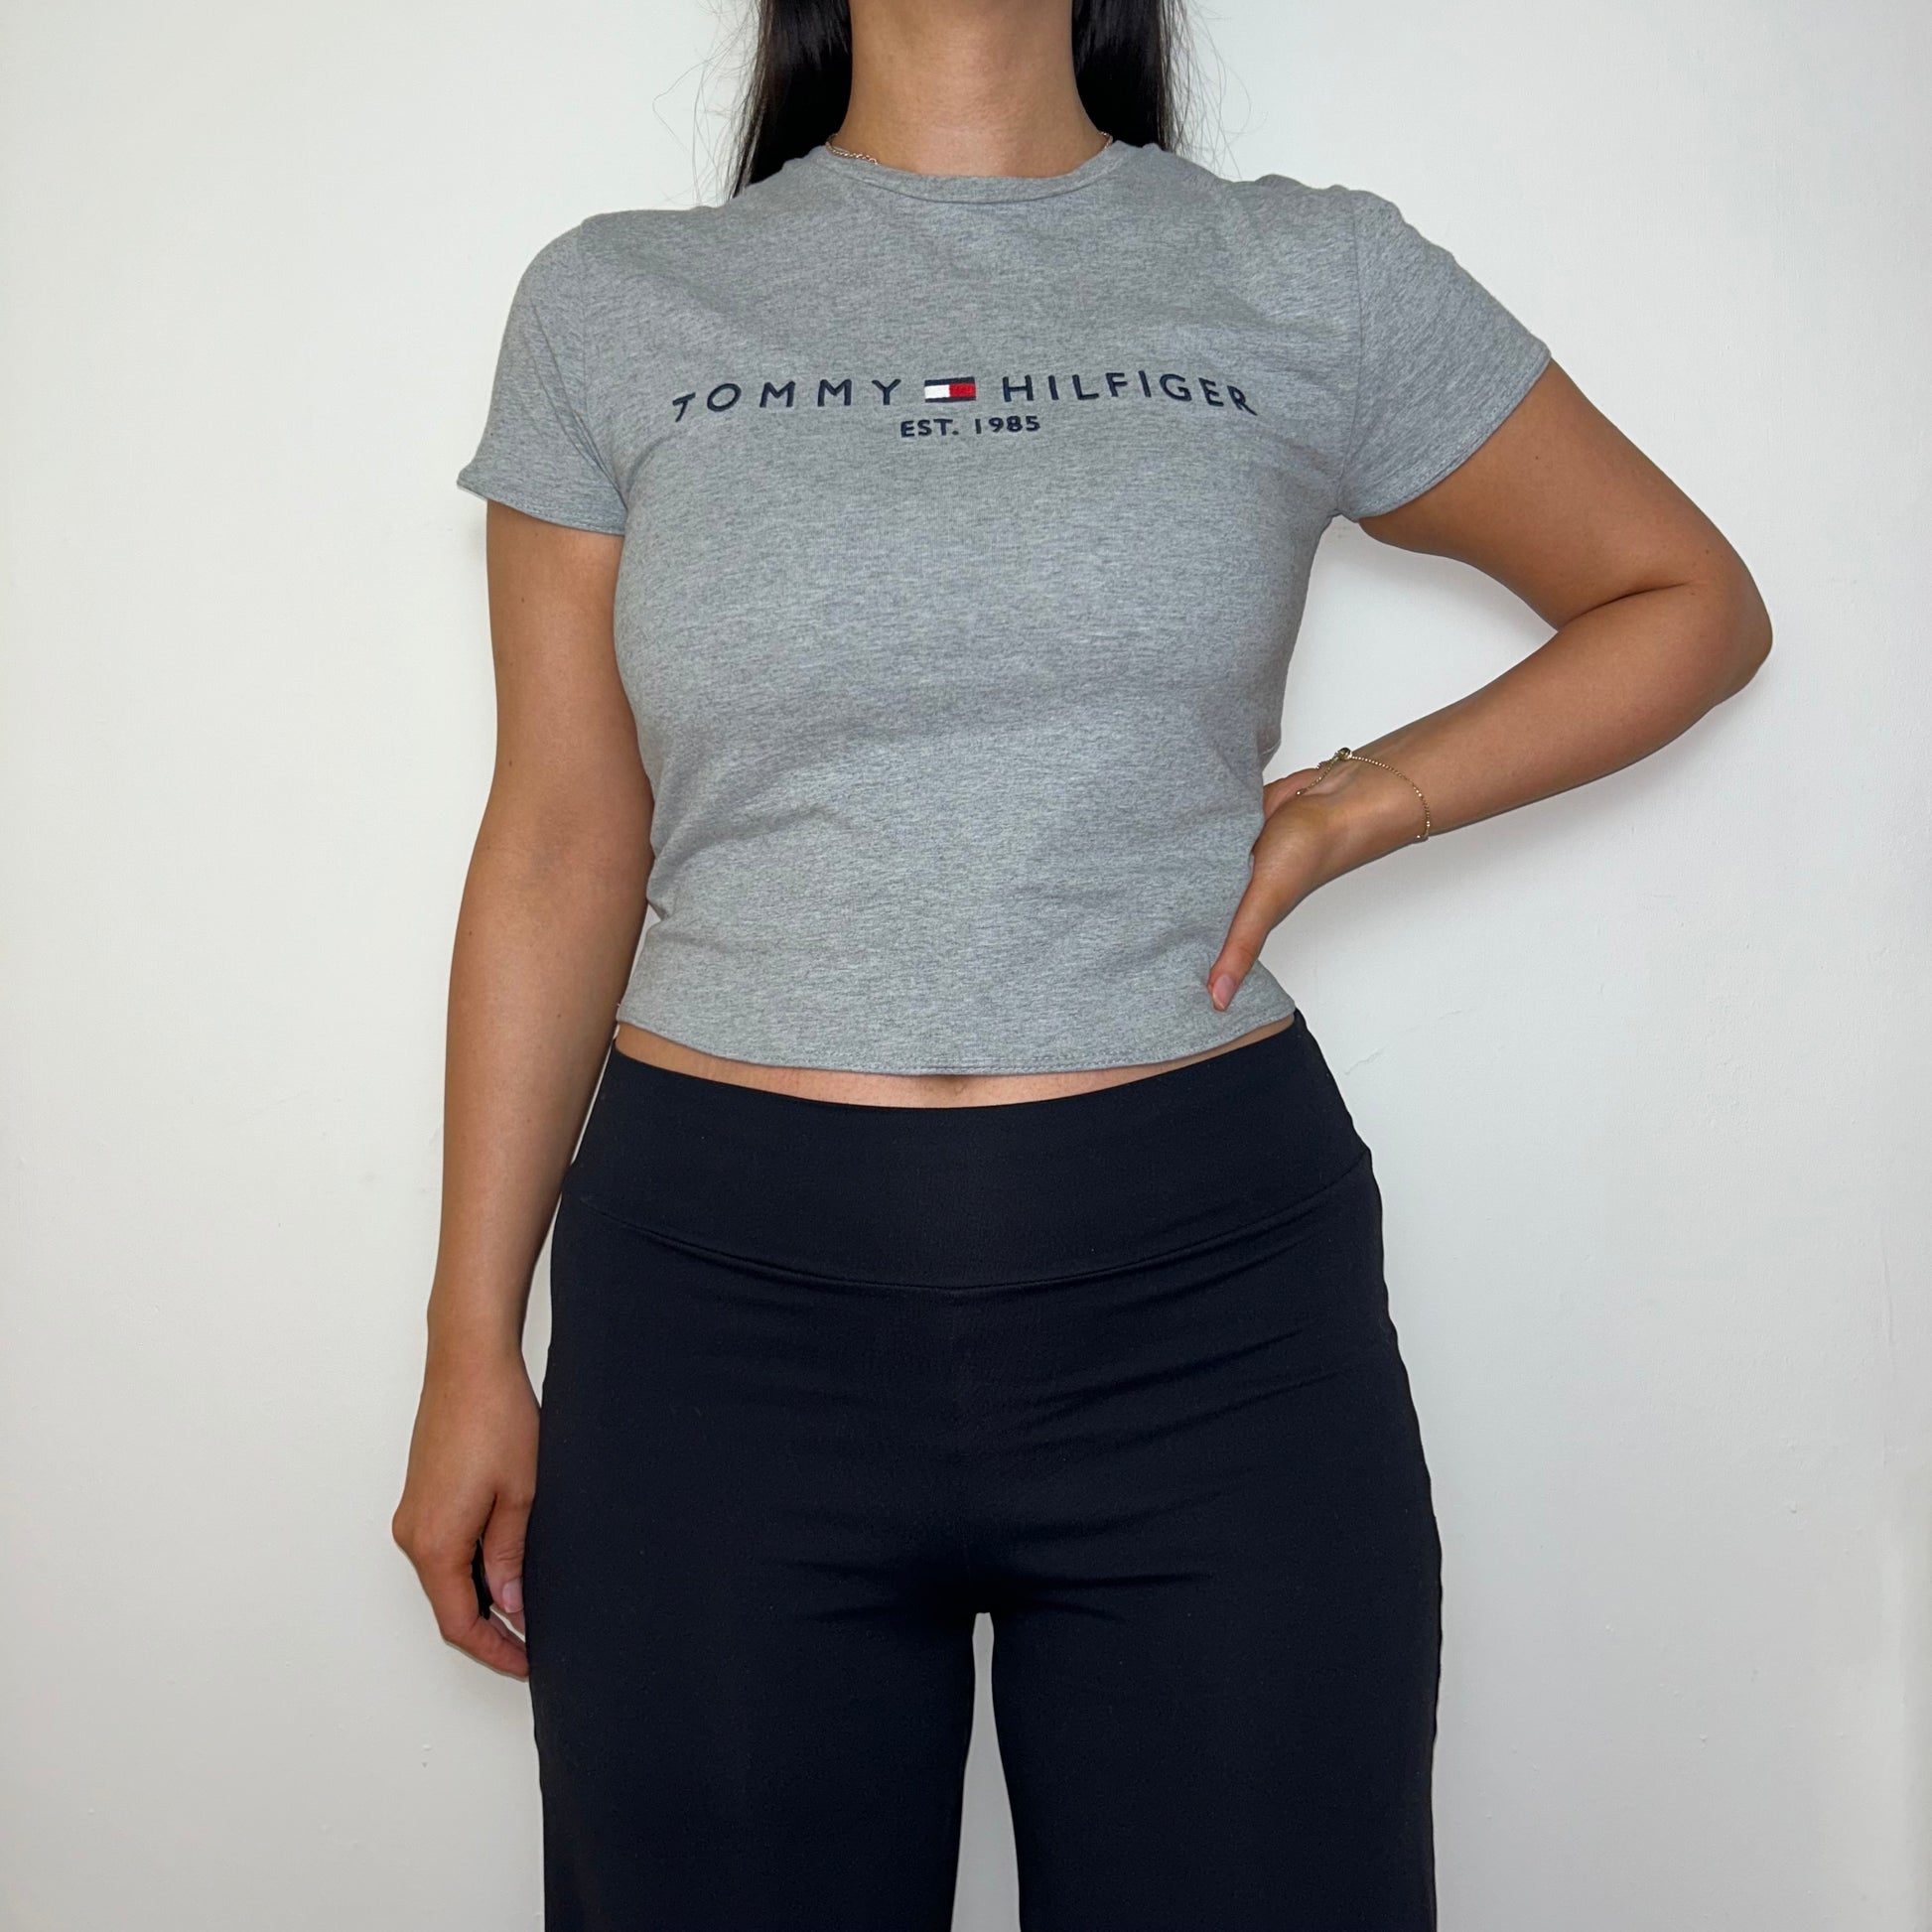 grey short sleeve crop top with black tommy hilfiger logo shown on a model wearing black trousers